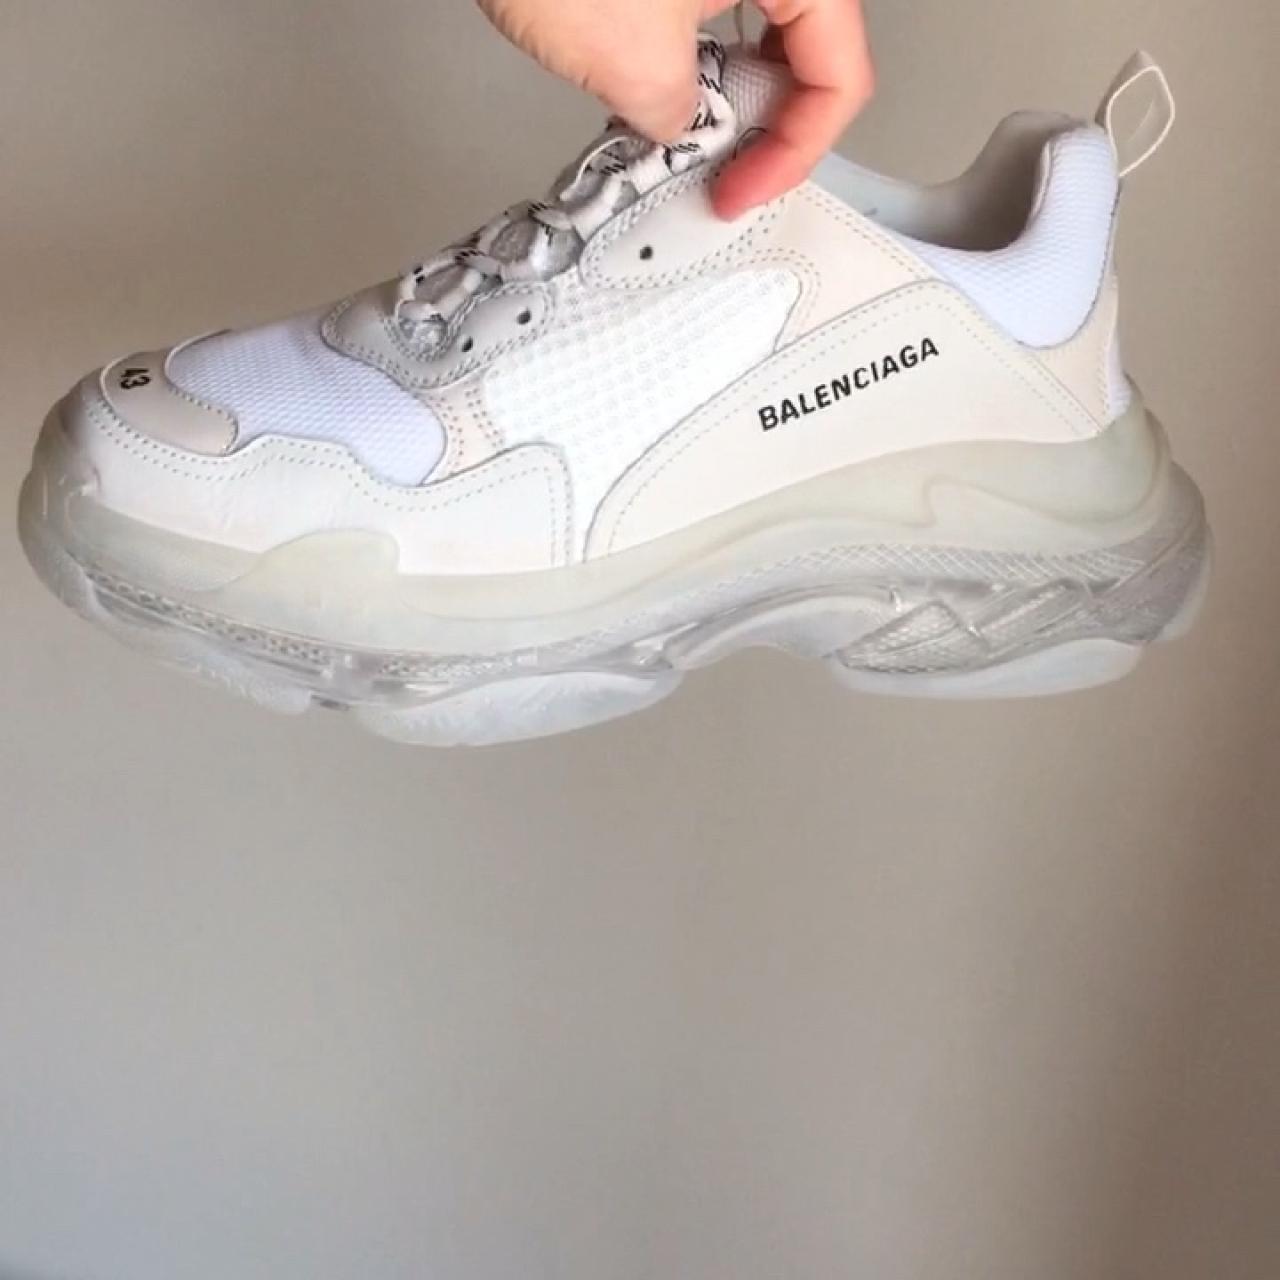 Price of Balenciaga Triple S Trainers Jaune Fluo shoes